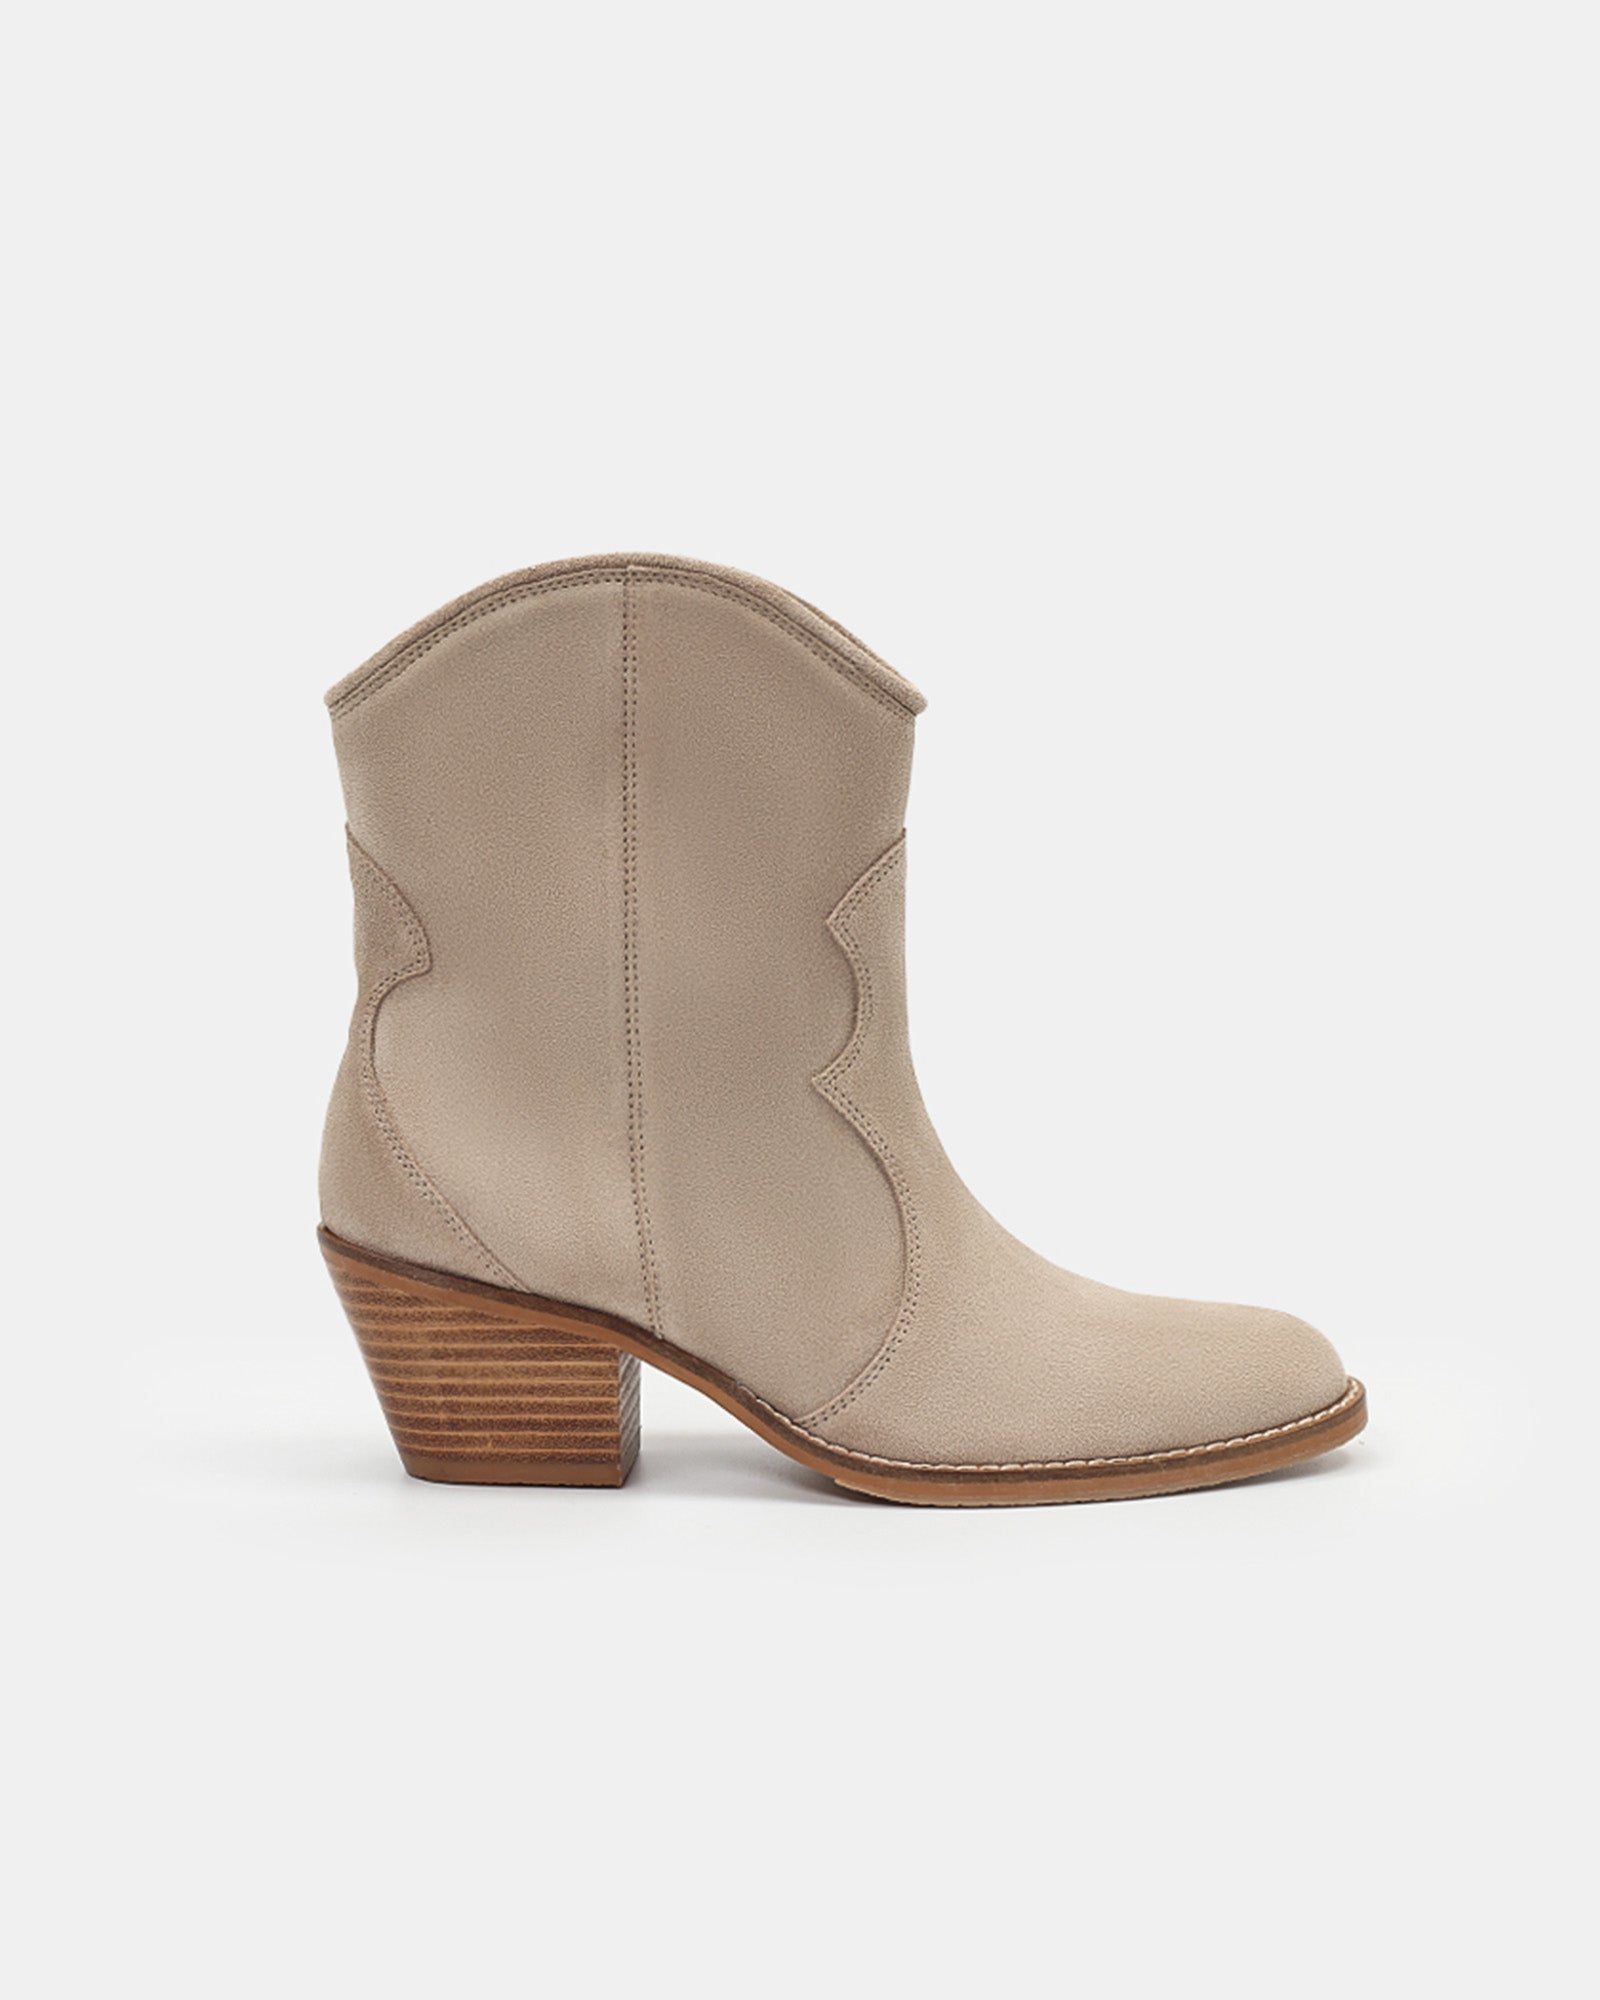 Shania Western Ankle Boots